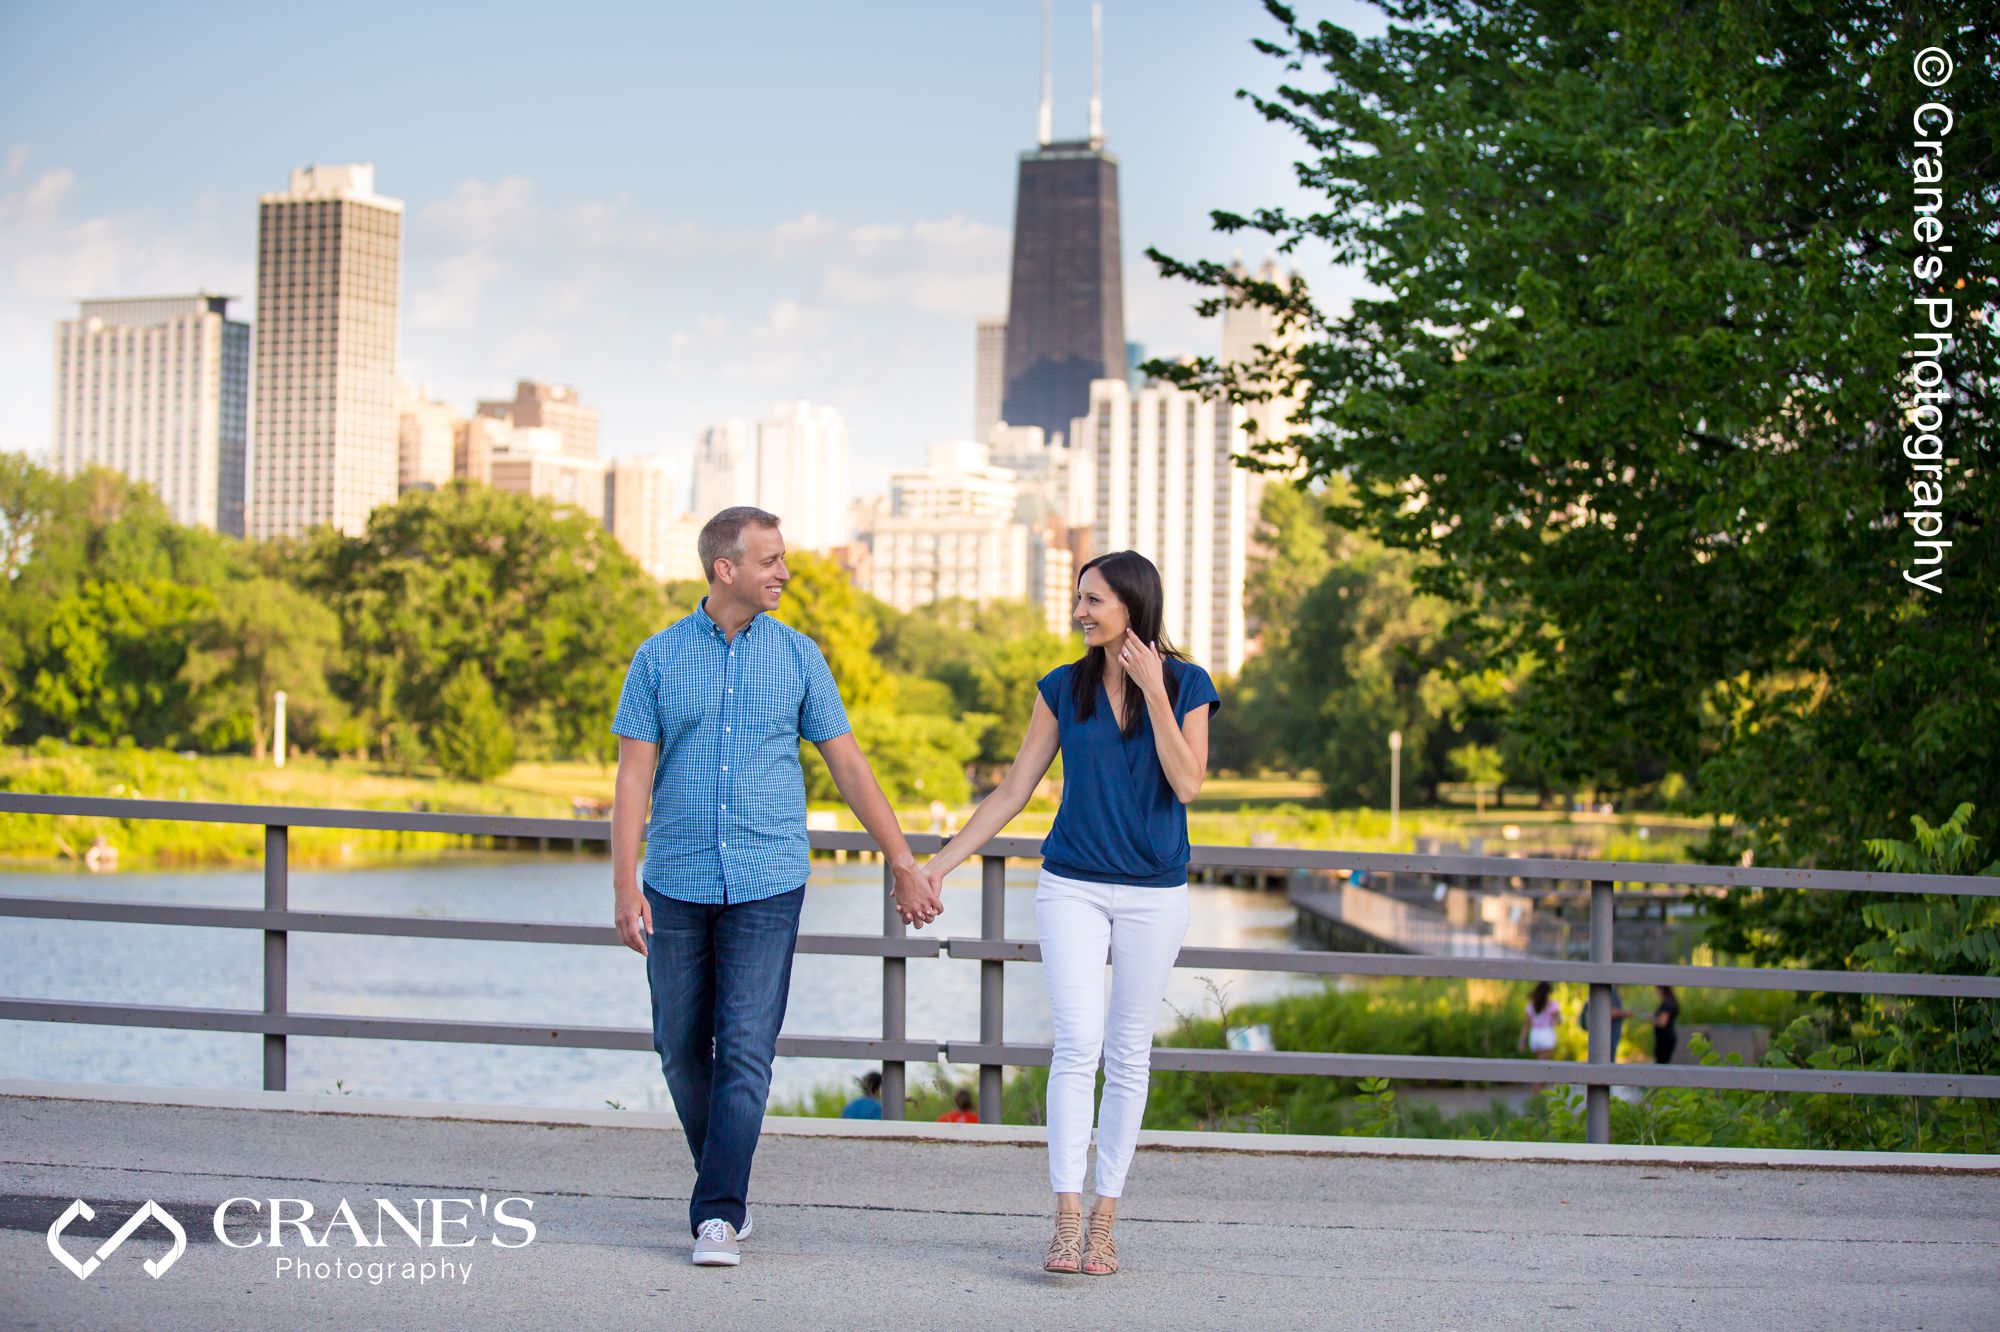 An engagement session photo of couple walking hand in hand with the city of Chicago in the background